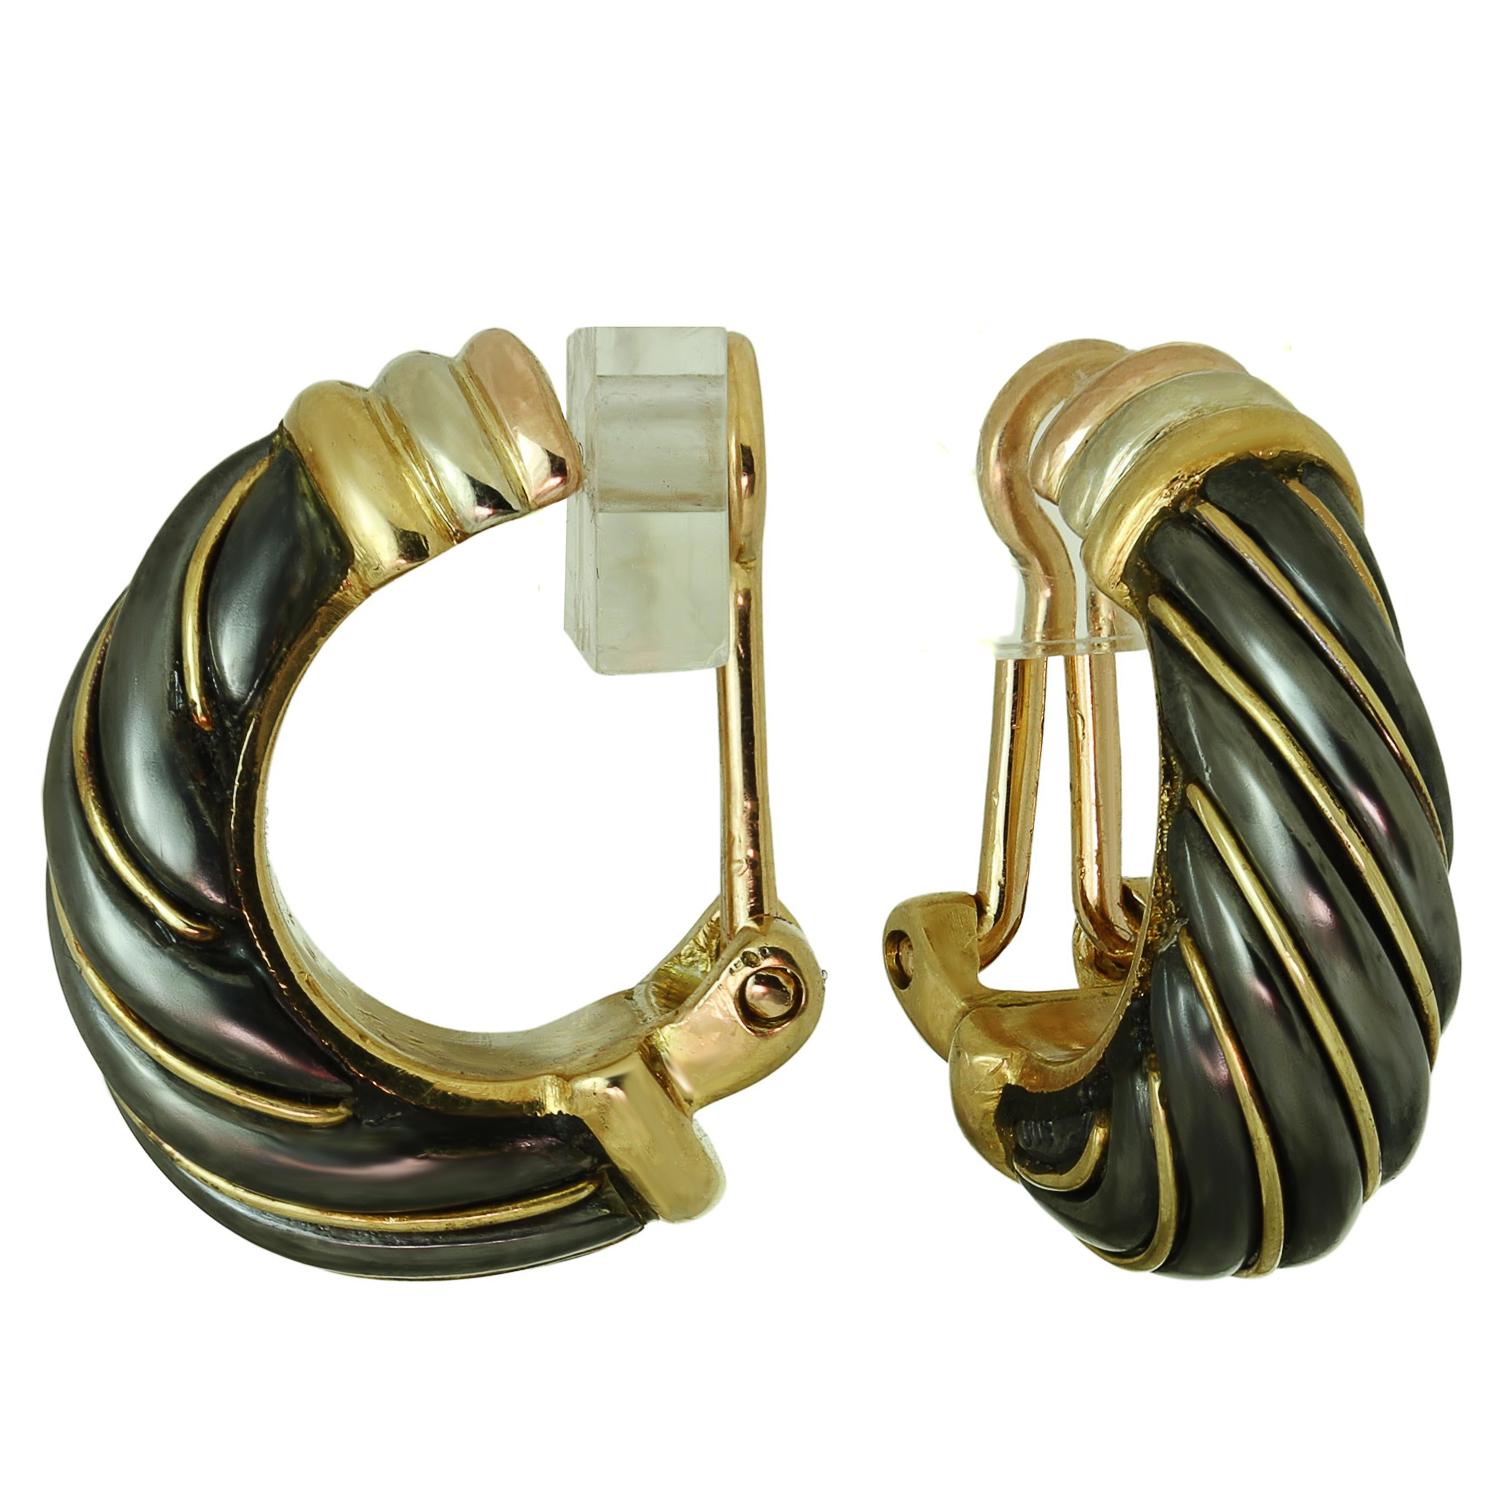 These gorgeous Cartier clip-on earrings are from the iconic Trinity collection and feature a wrap design crafted in 18k yellow, white, and rose gold and set with hematite. Made in France circa 1990s.  Measurements: 0.31